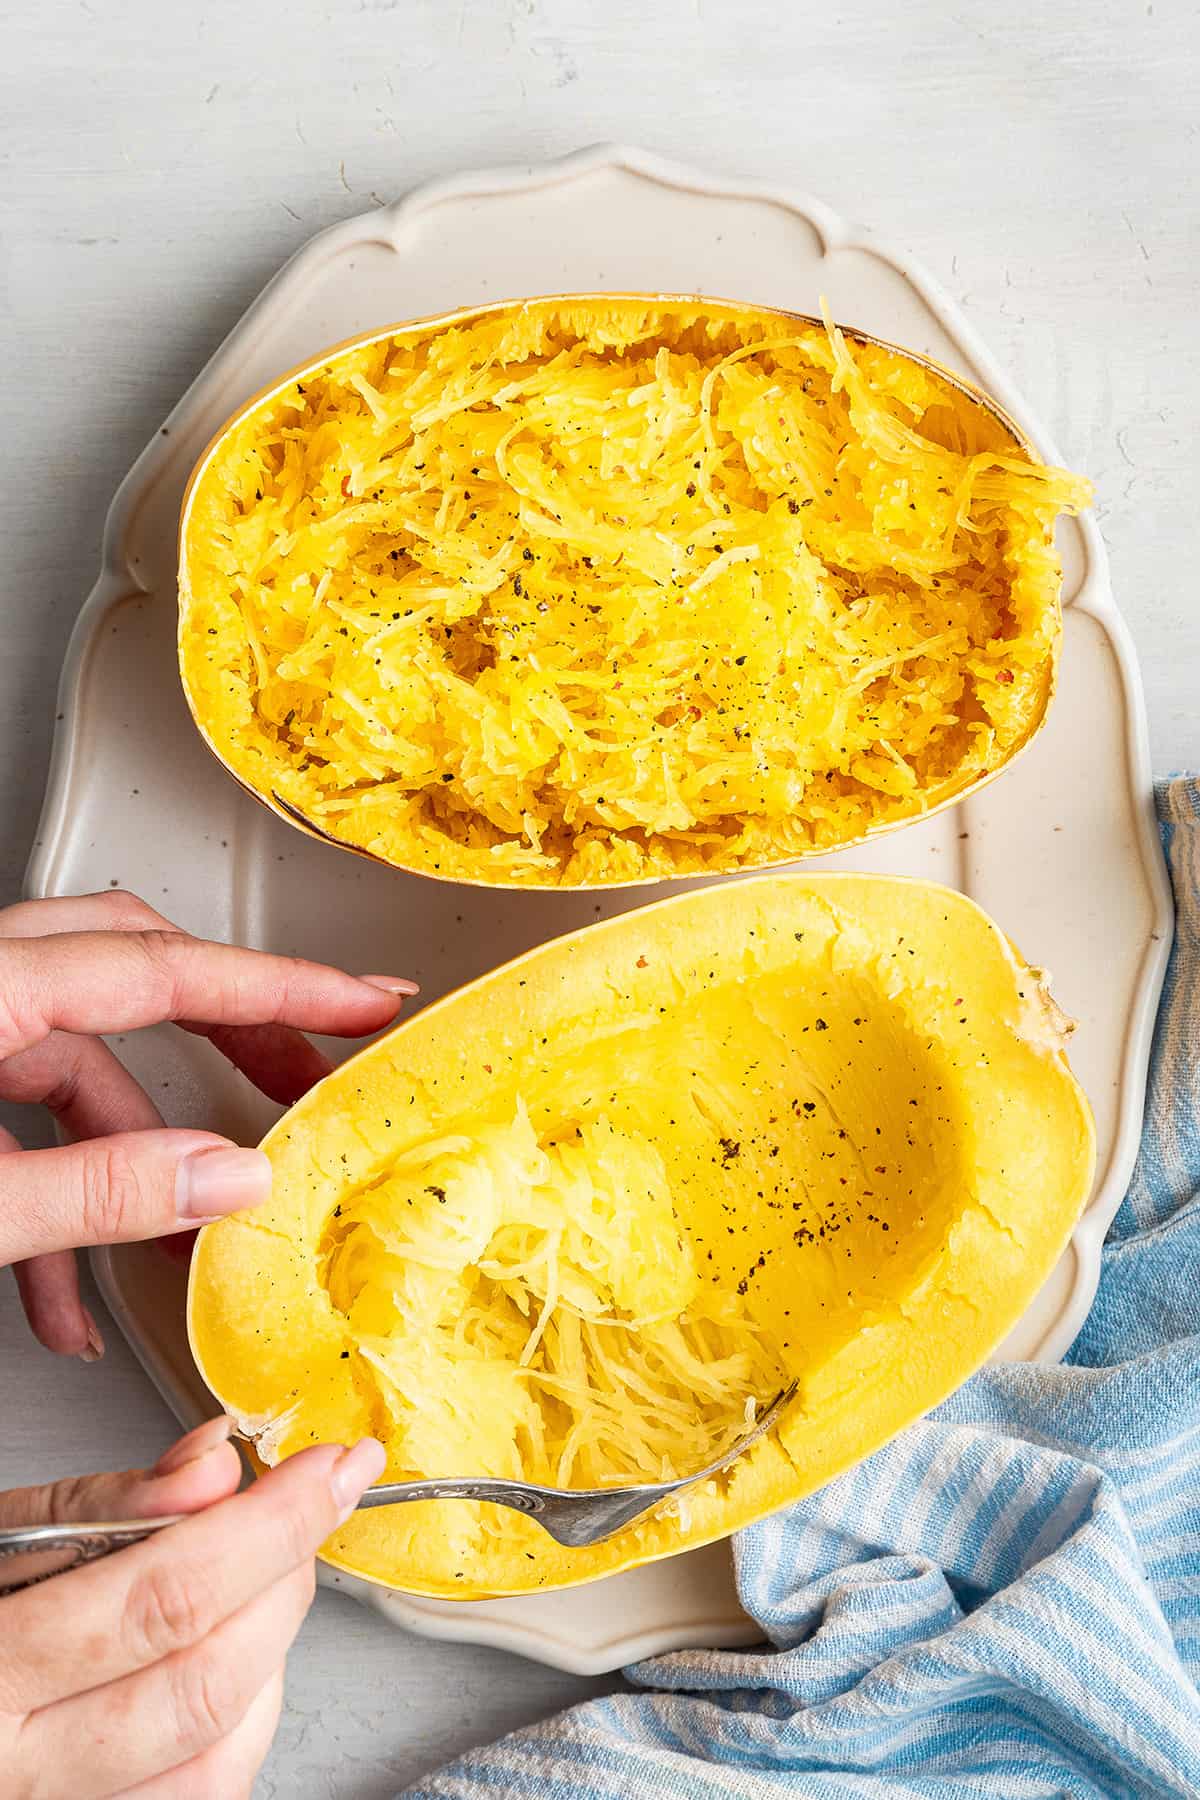 A cooked spaghetti squash cut in half on a serving tray, with one half shredded, and the other half in the process of being shredded by a fork